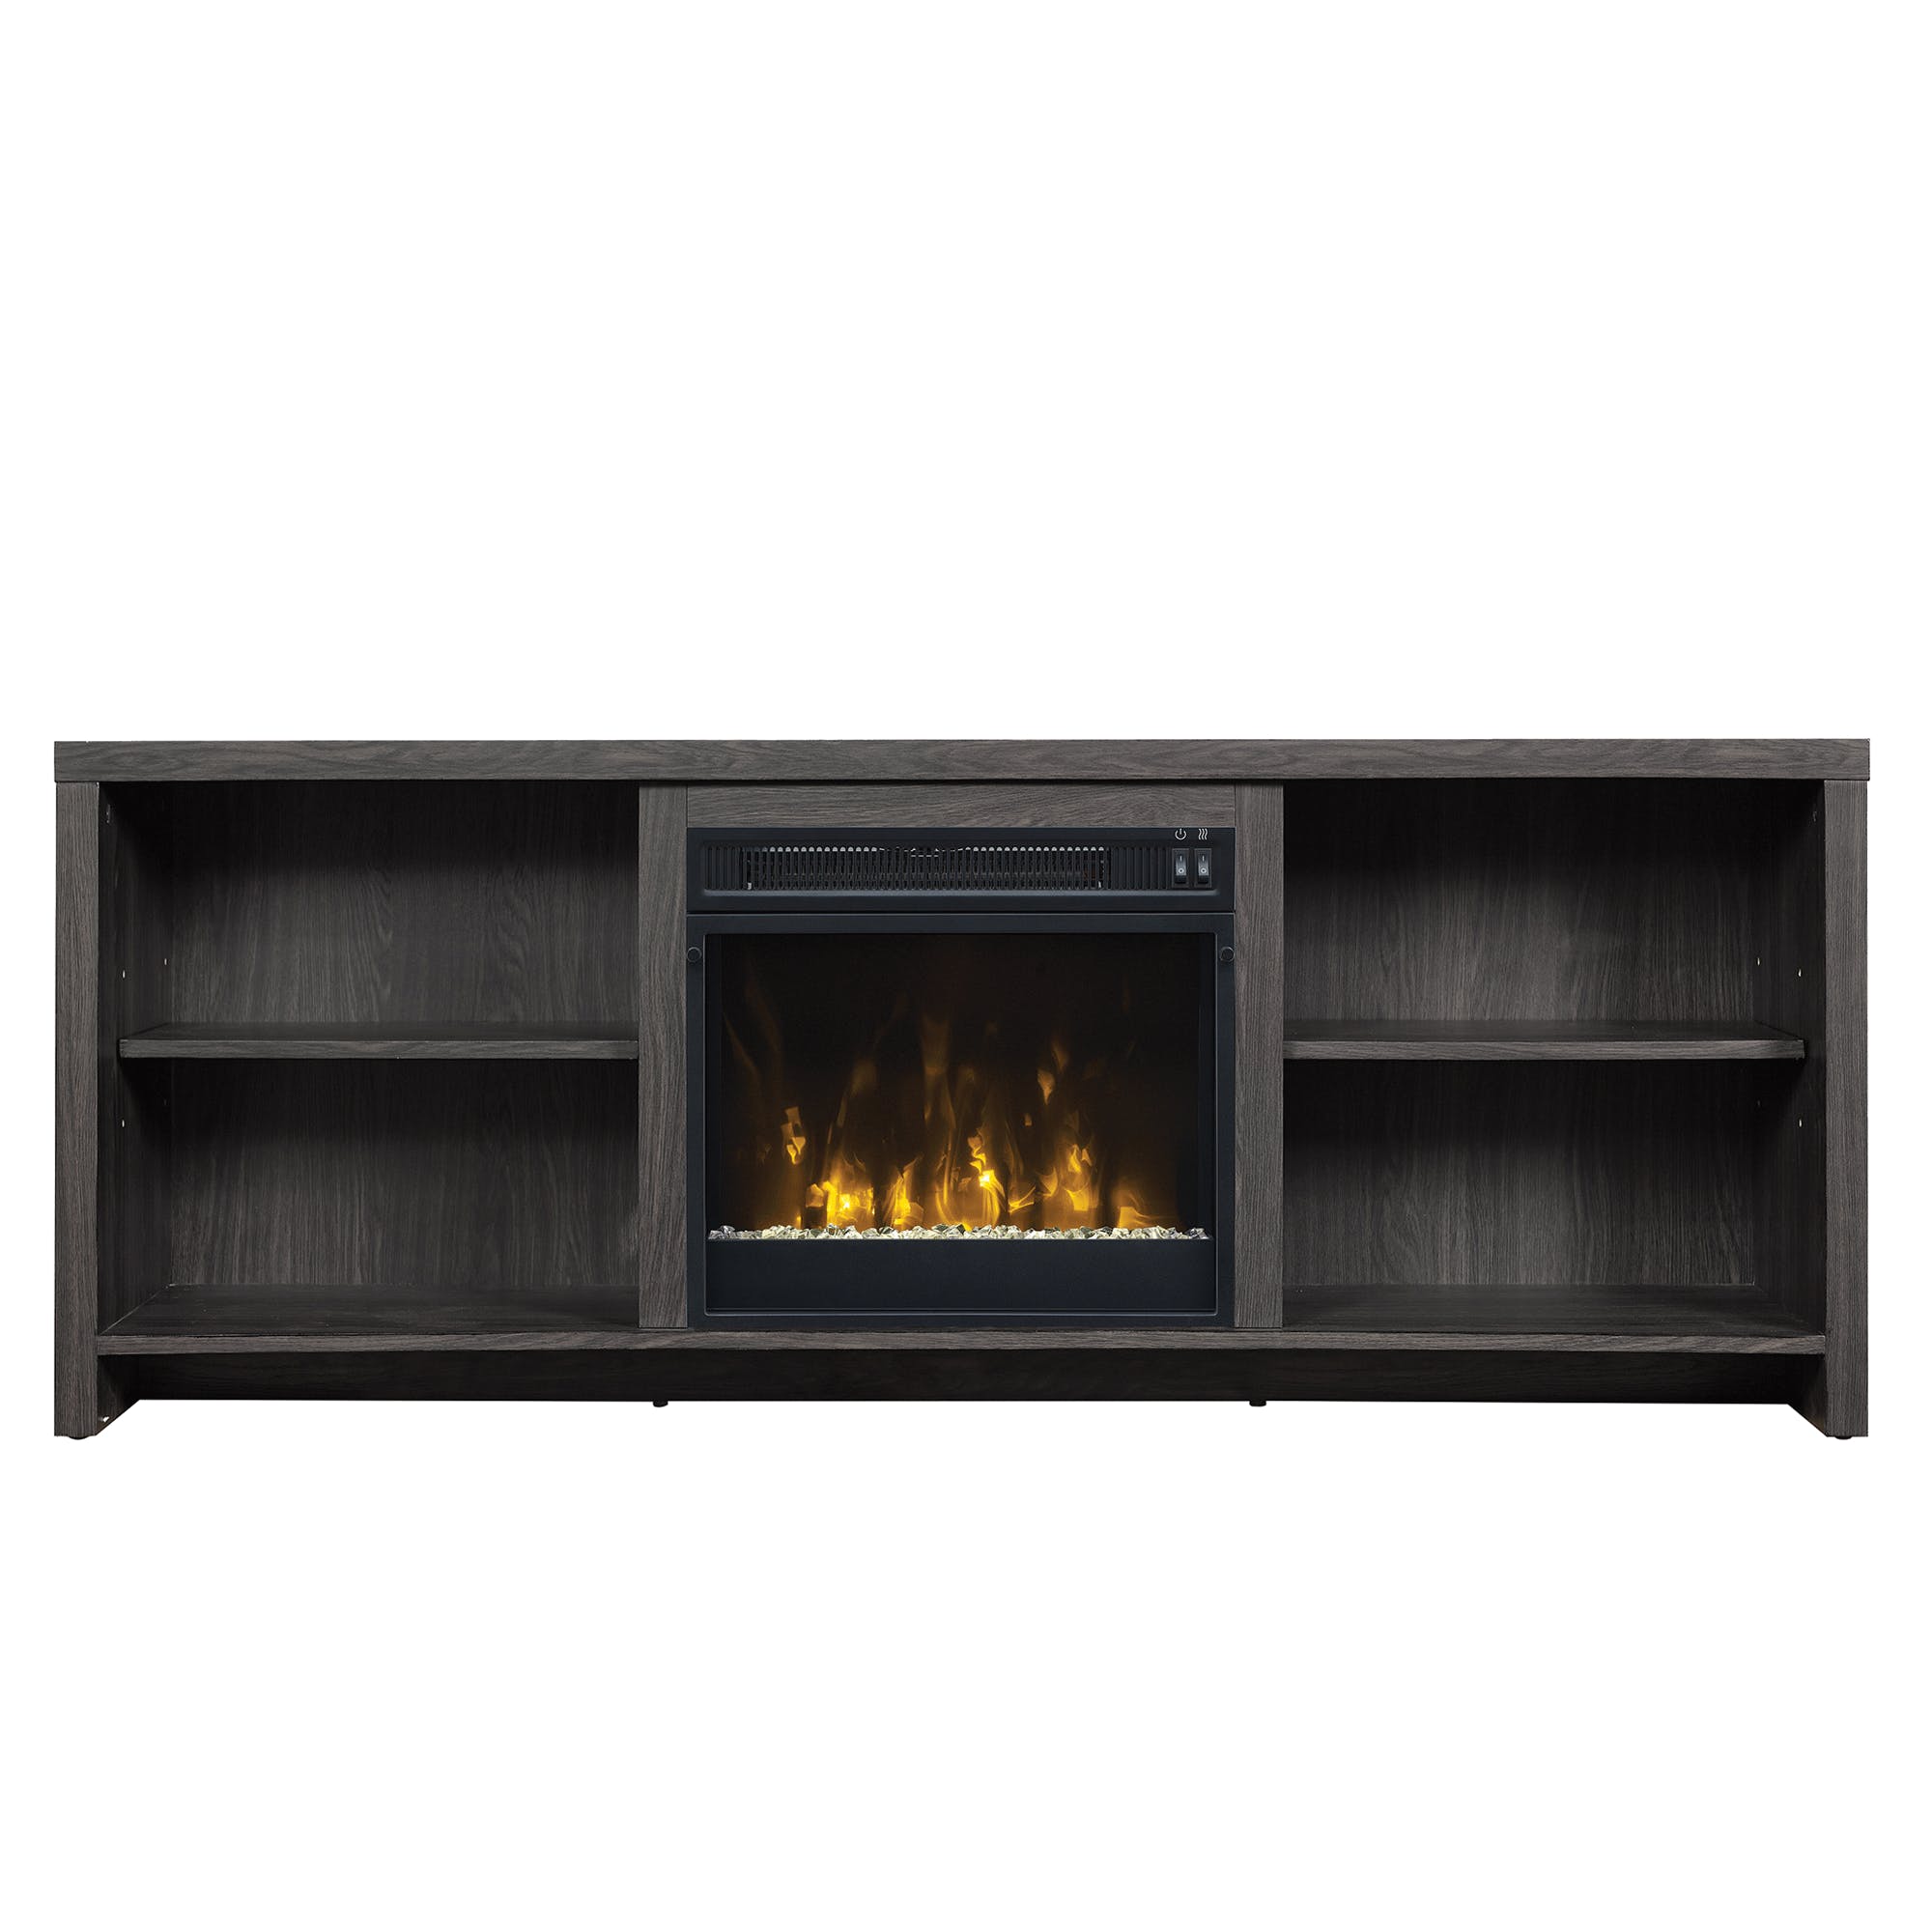 Tv Fire Wall Unique Shelter Cove Tv Stand for Tvs Up to 65" with 18" Electric